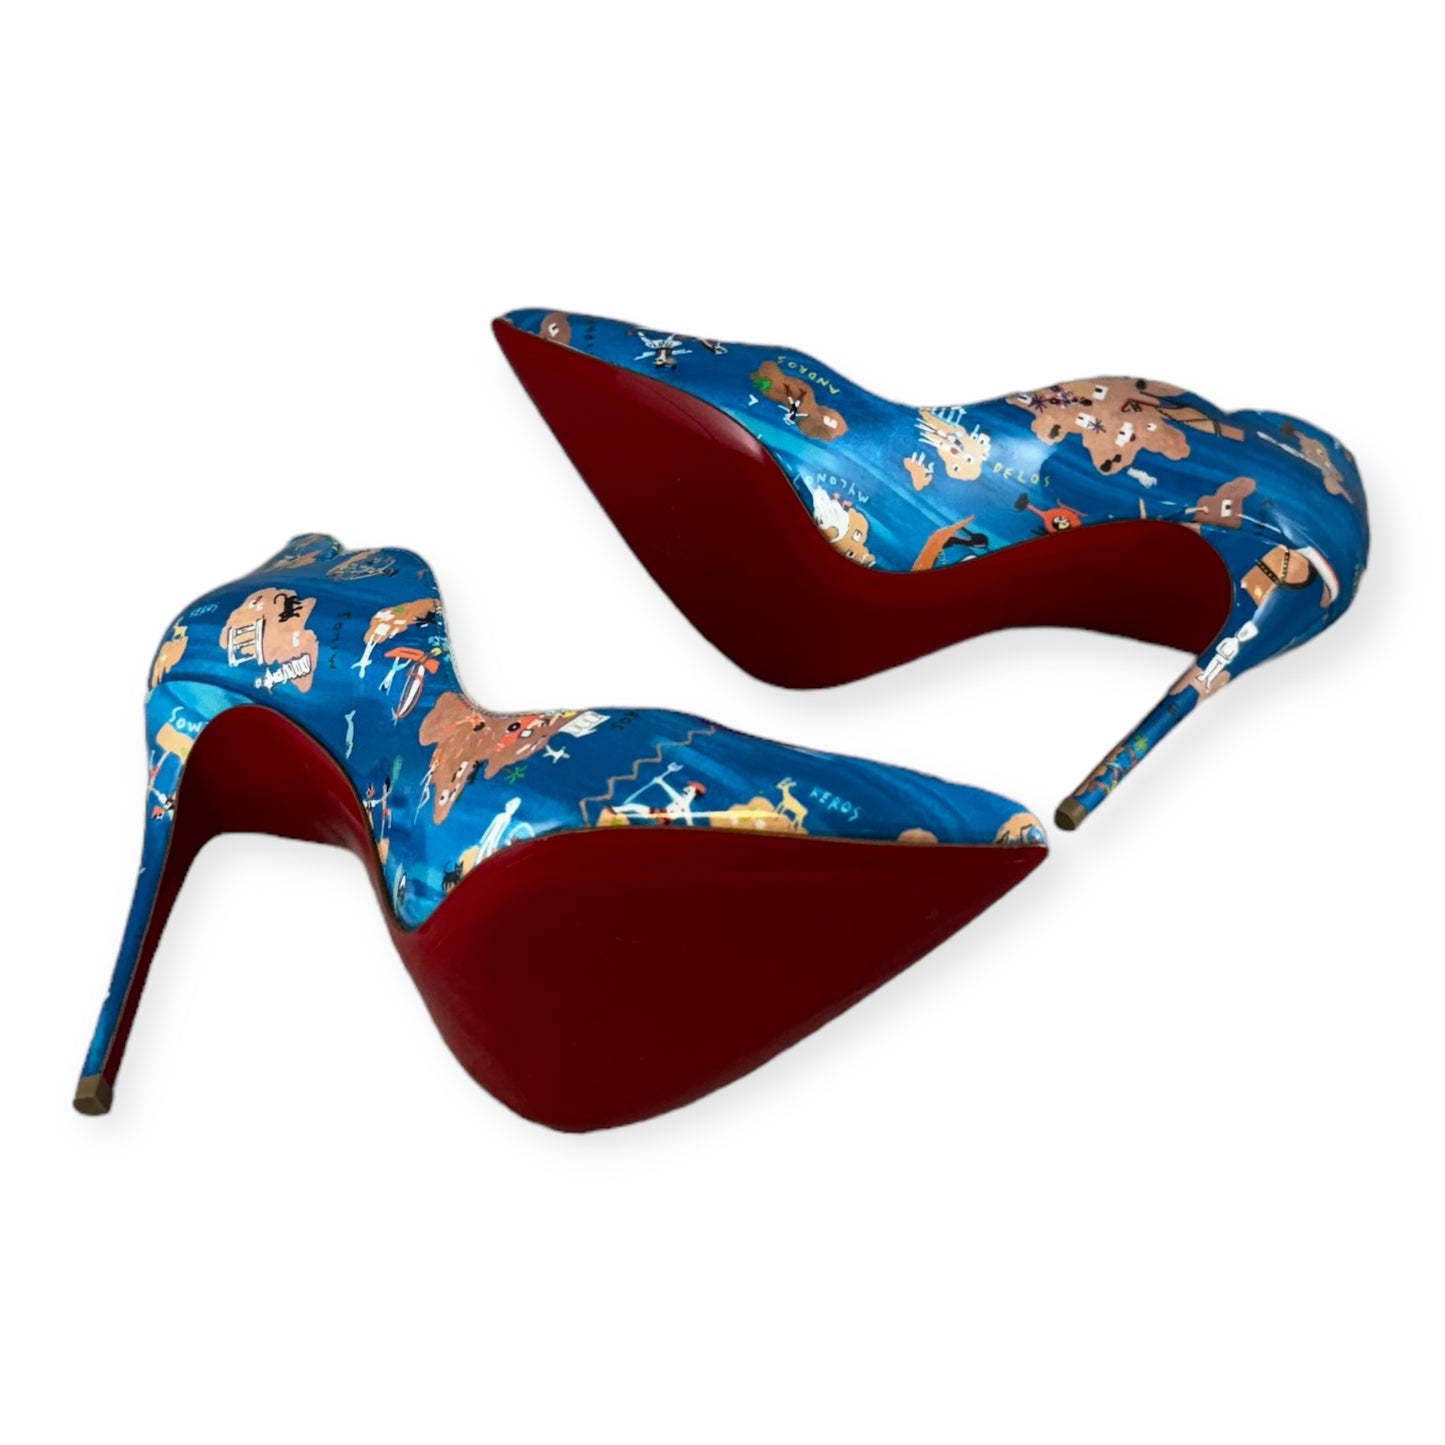 CHRISTIAN LOUBOUTIN Hot Chick Odyssey Pumps in Blue | Size 37.5